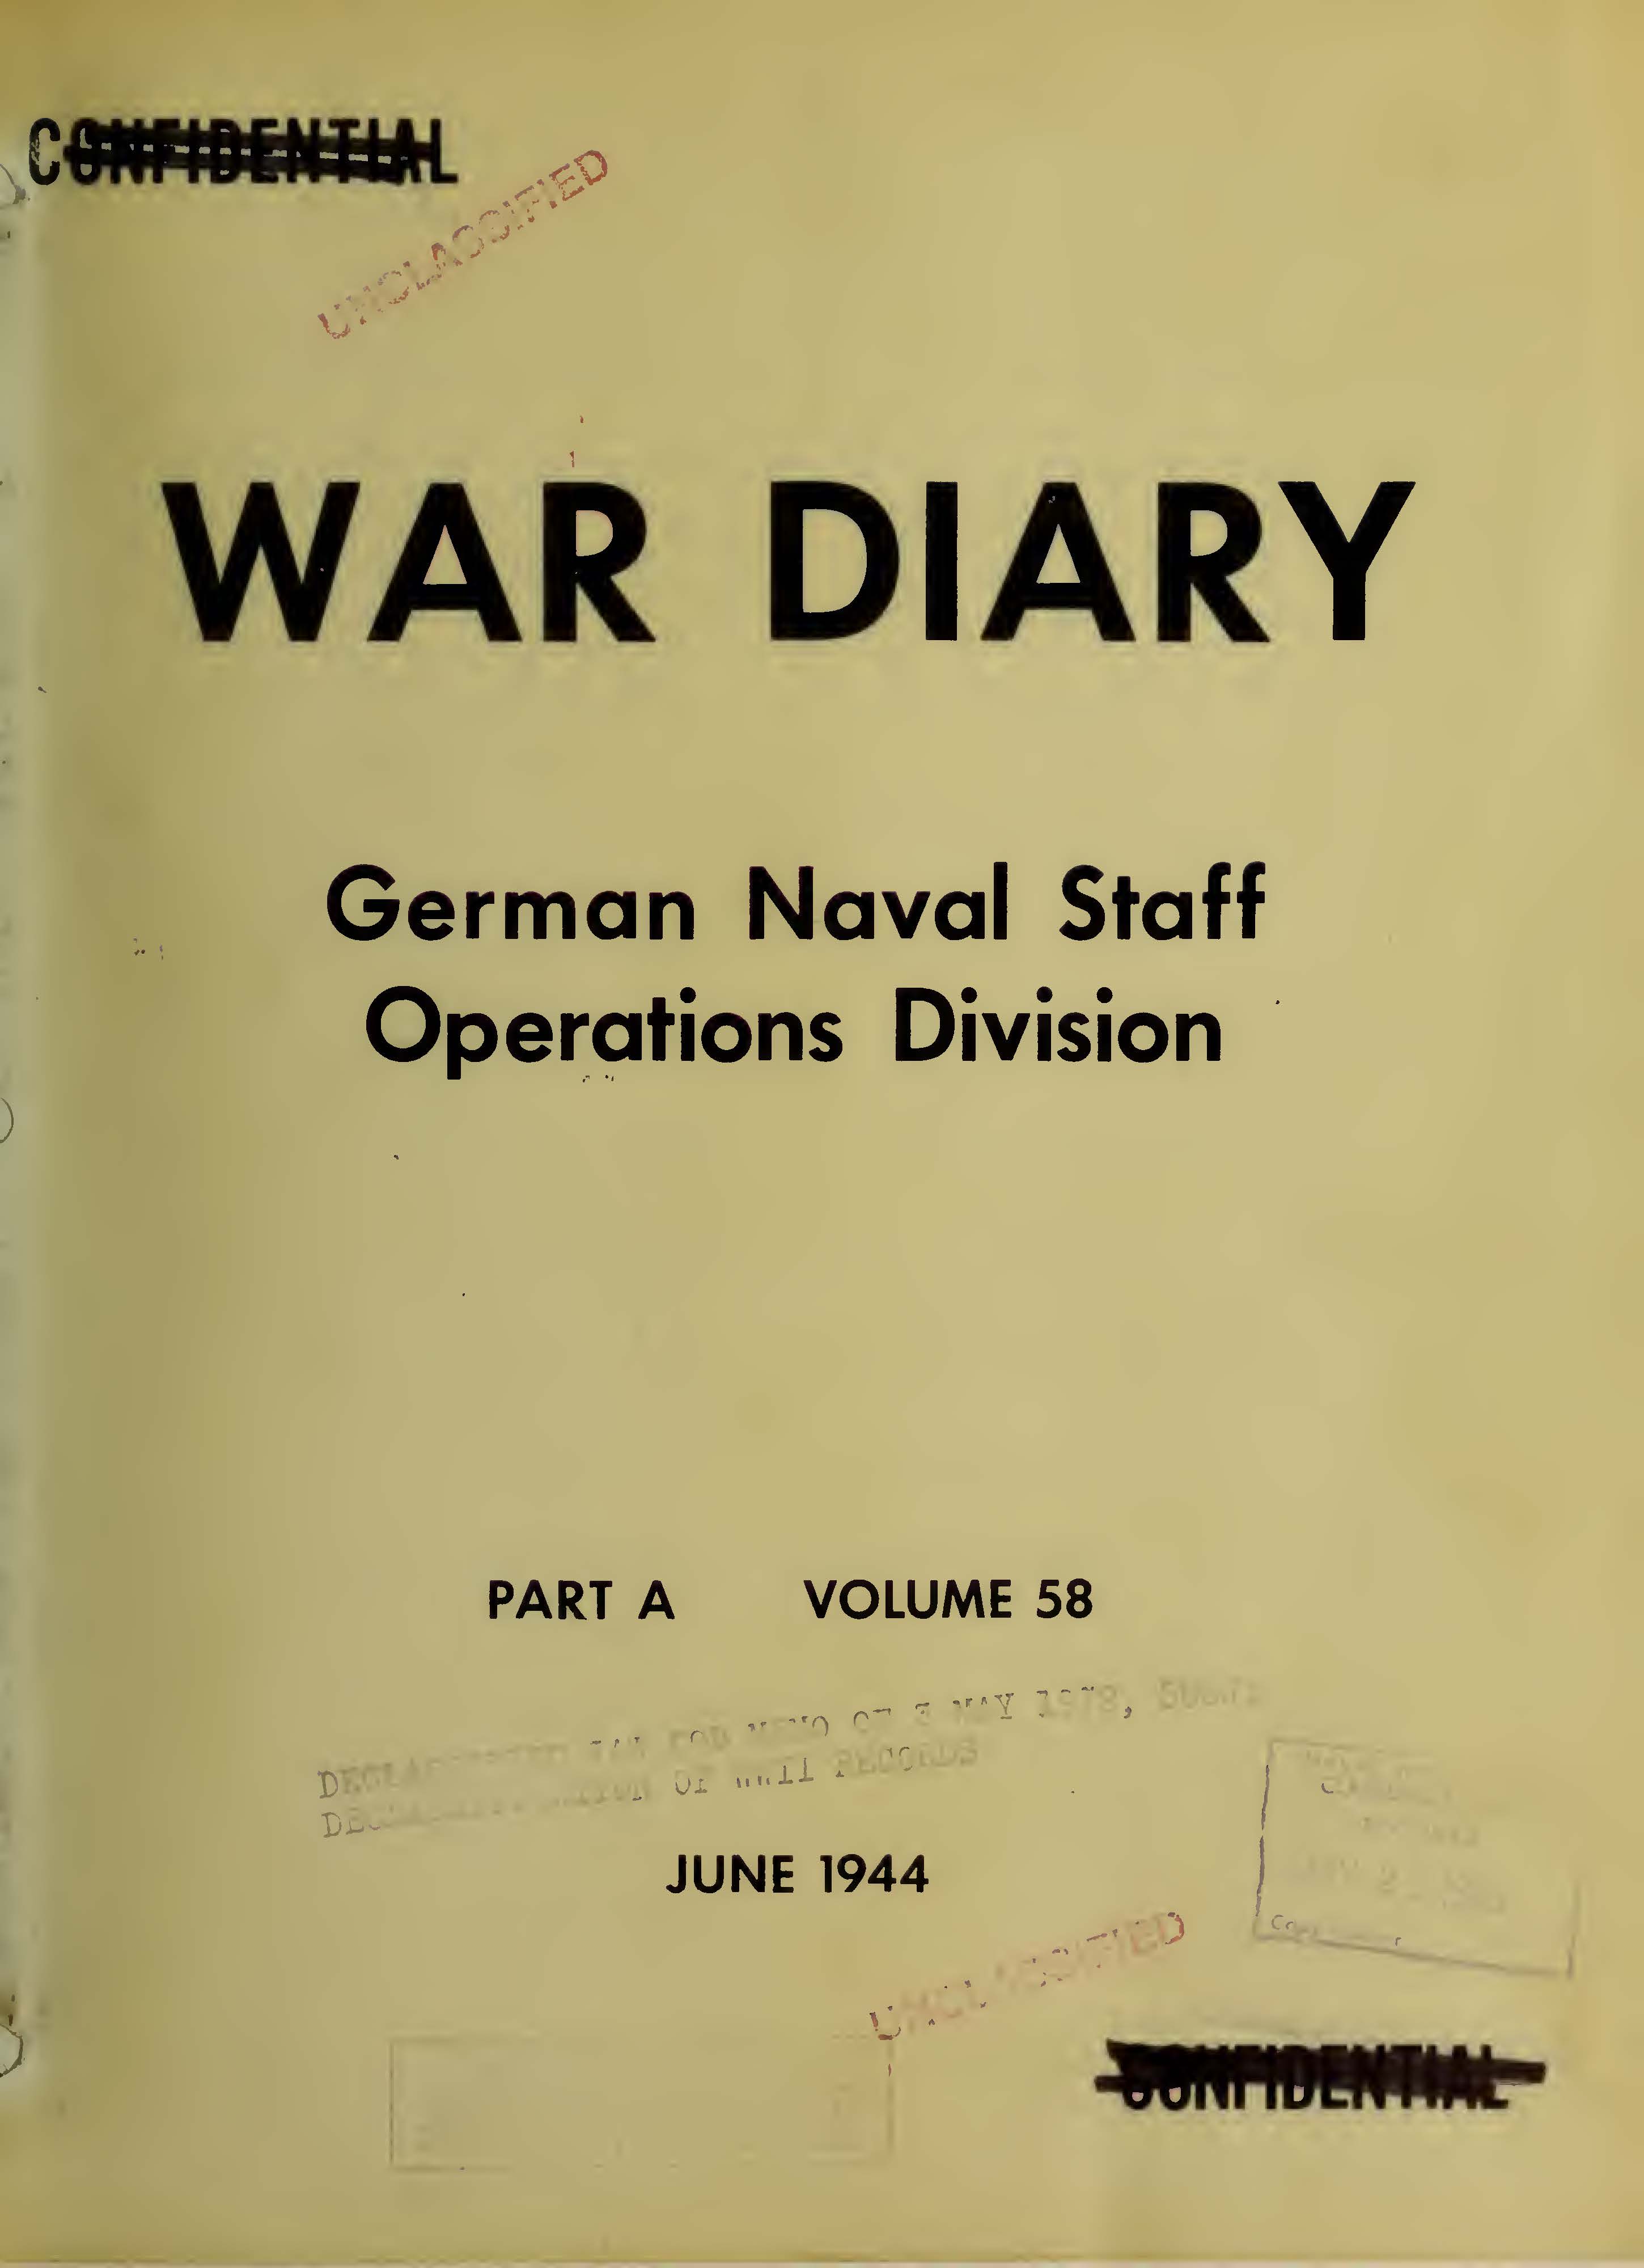 War Diary of German Naval Staff (Operations Division) Part A, Volume 58, June 1944